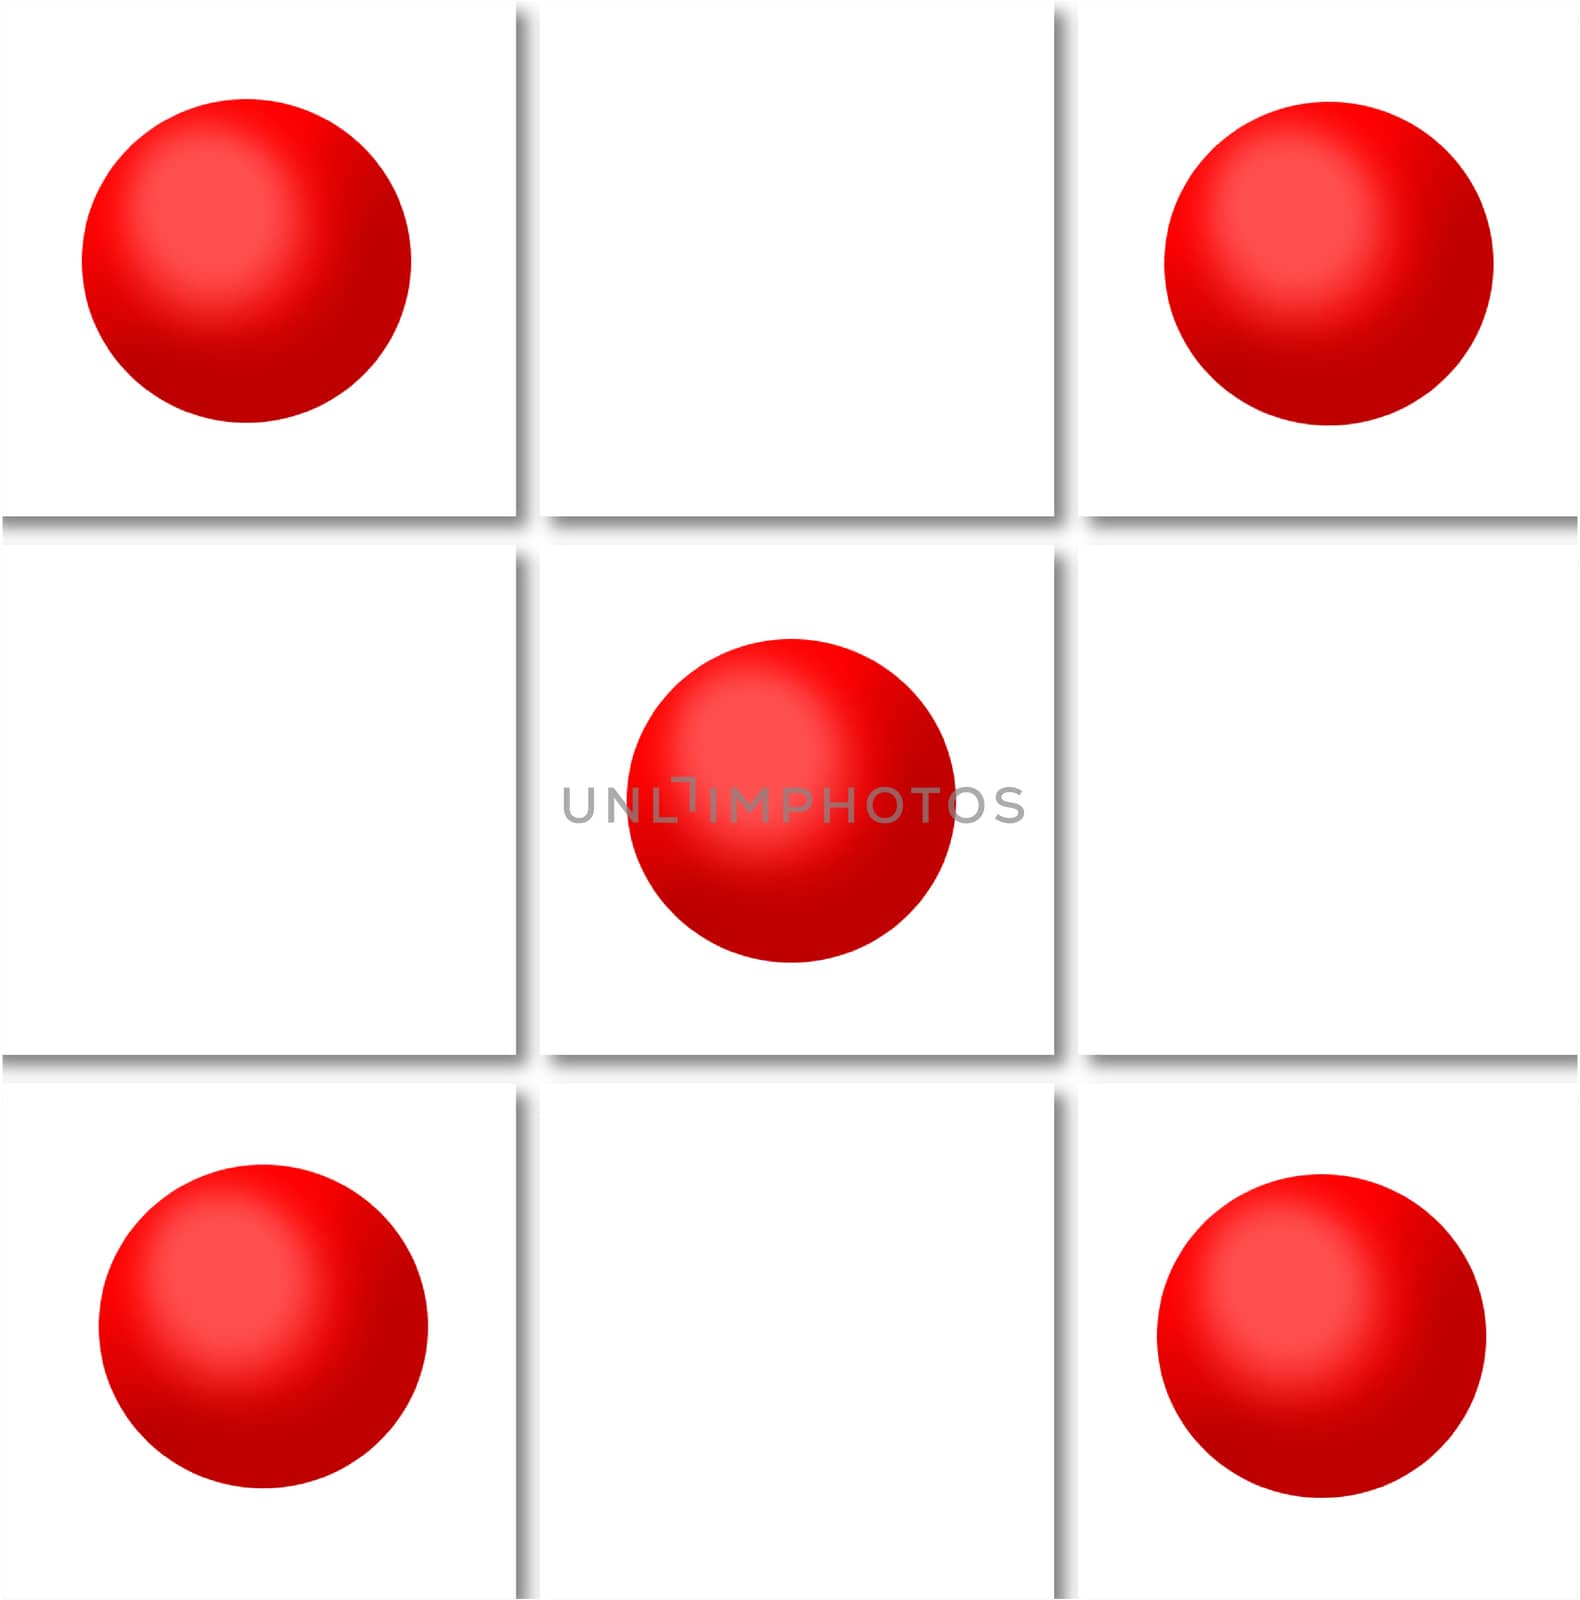 red spheres on white tile pattern by Nawoot